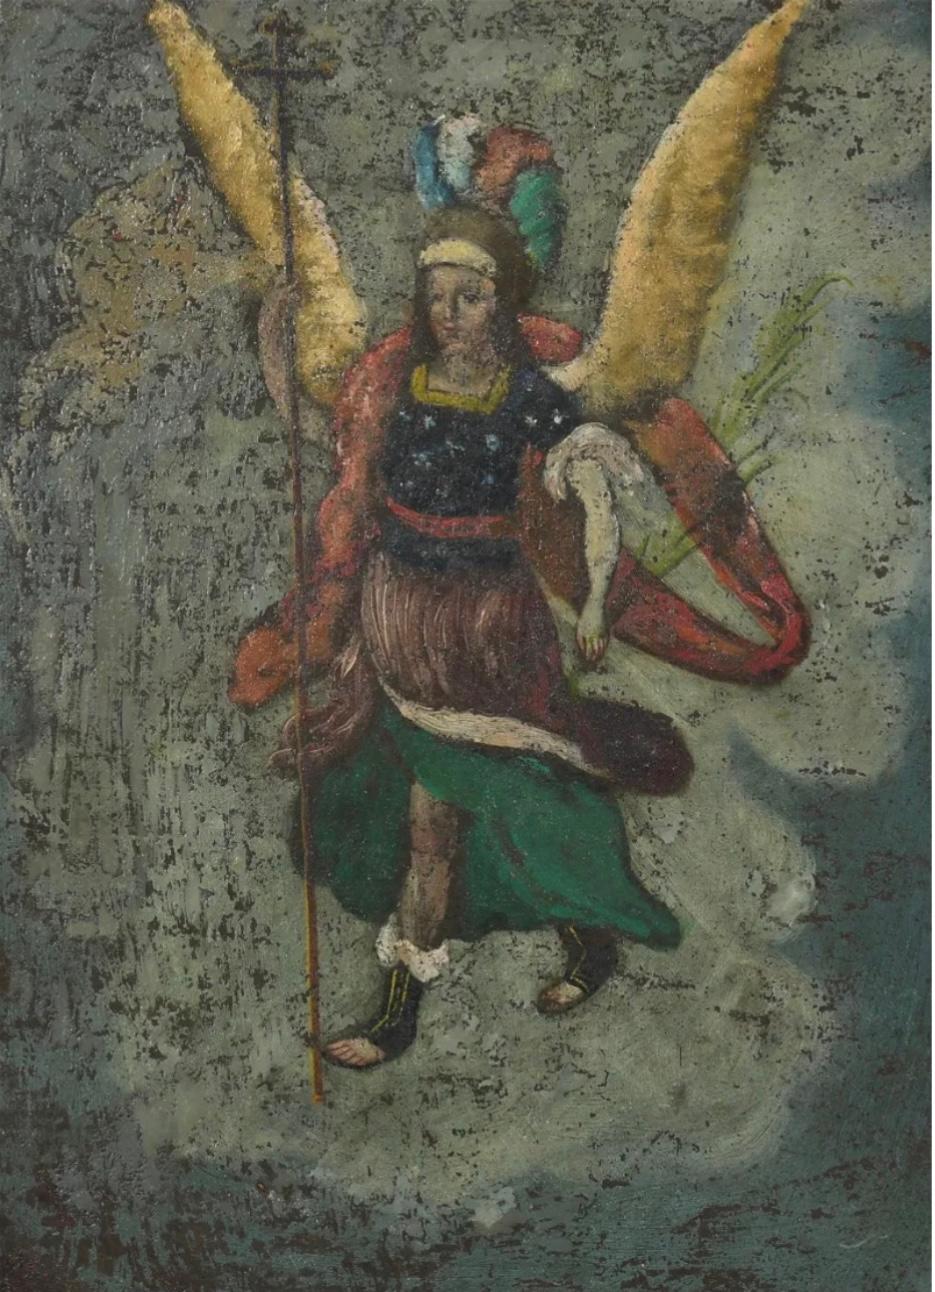 Spanish Colonial oil on tin painting. A retablo depicting St. Michael the Archangel. Colors of red, navy and green on a teal background. Painting dimensions are 13in x9in, while frame is 14.5 x 10.5in x 1in.